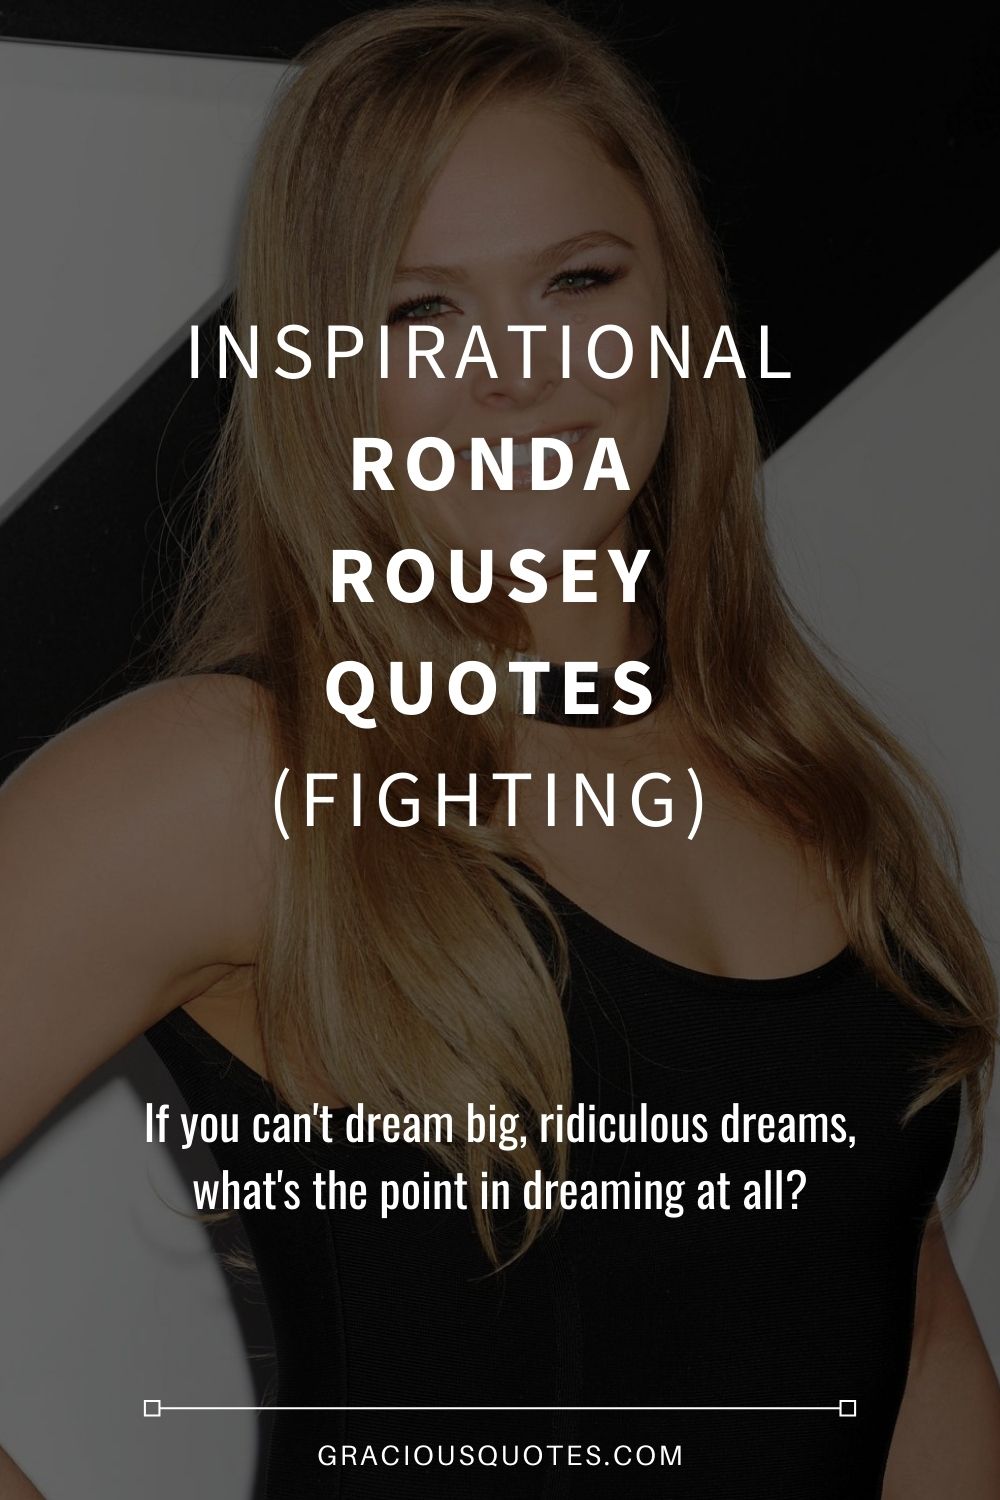 Inspirational Ronda Rousey Quotes (FIGHTING) - Gracious Quotes